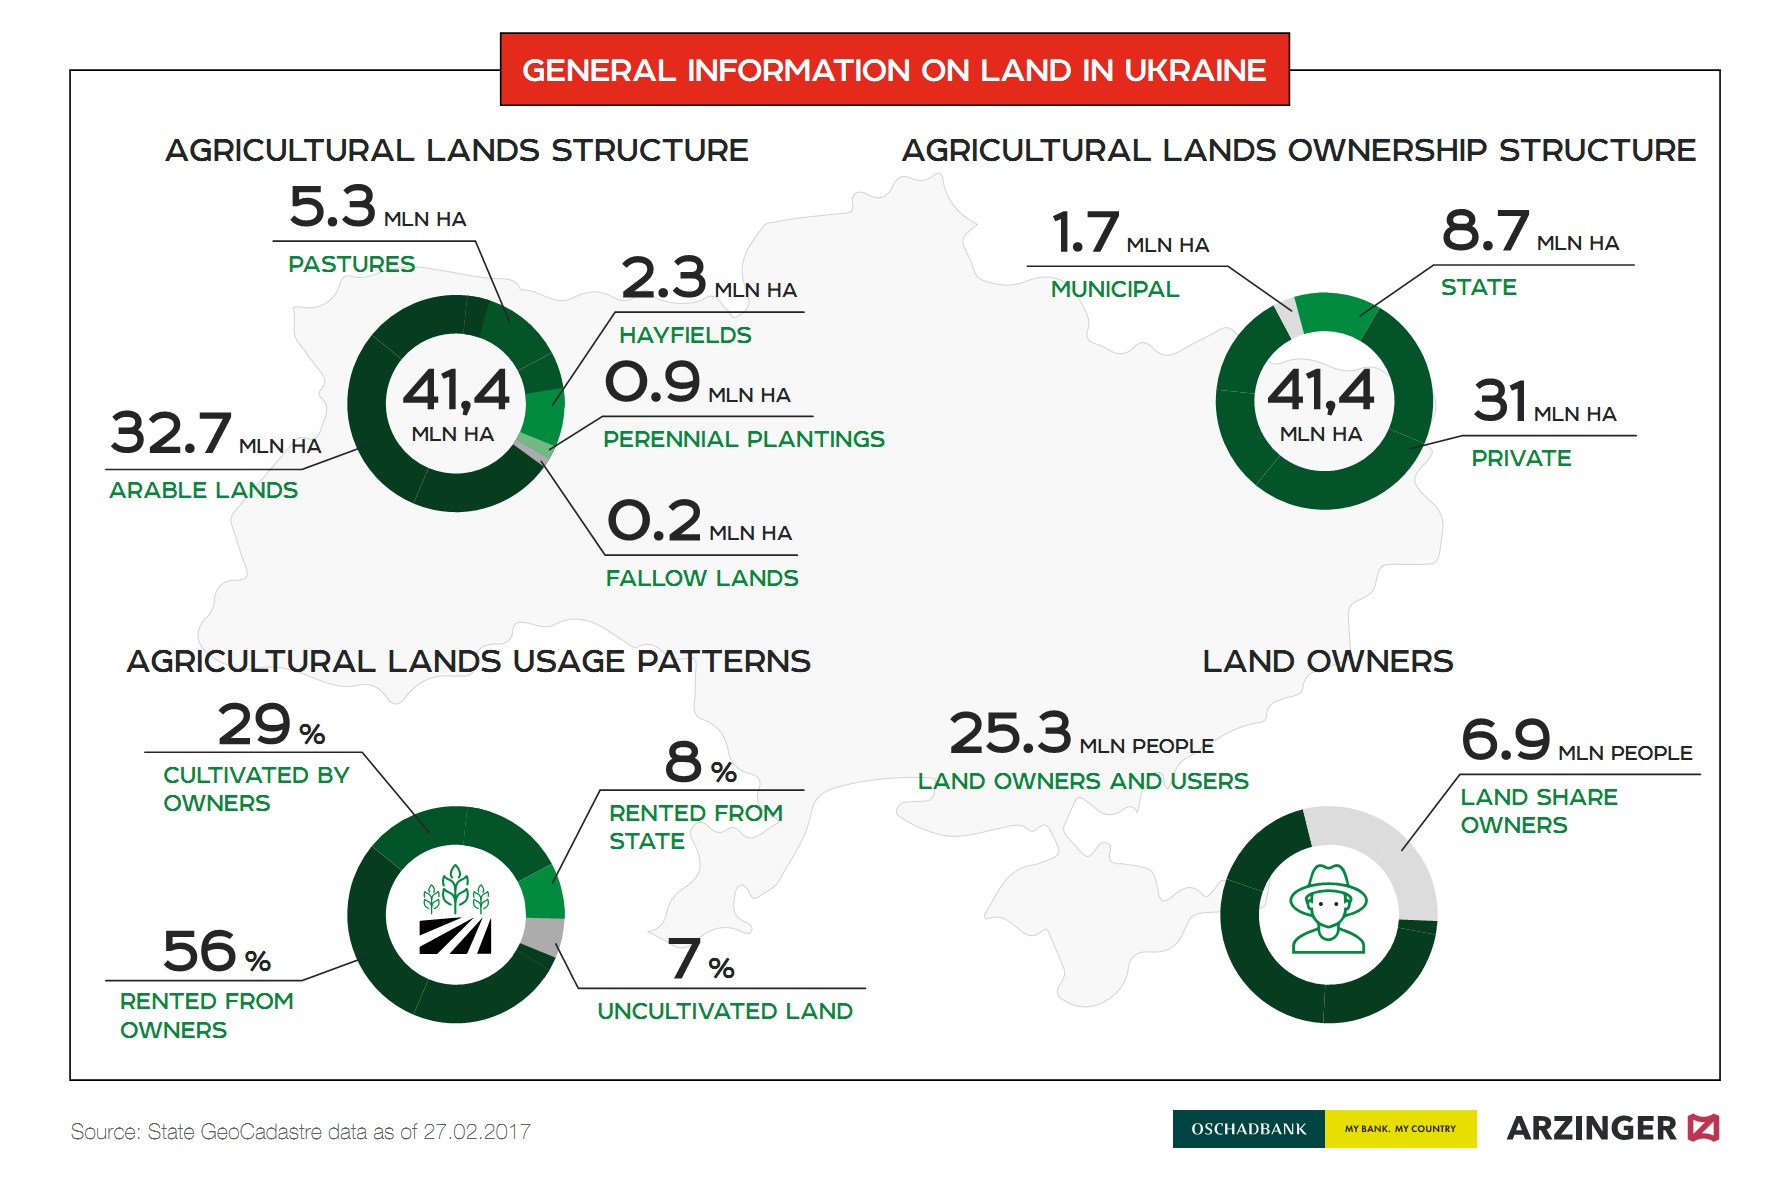 General information on land in Ukraine (click for full resolution)